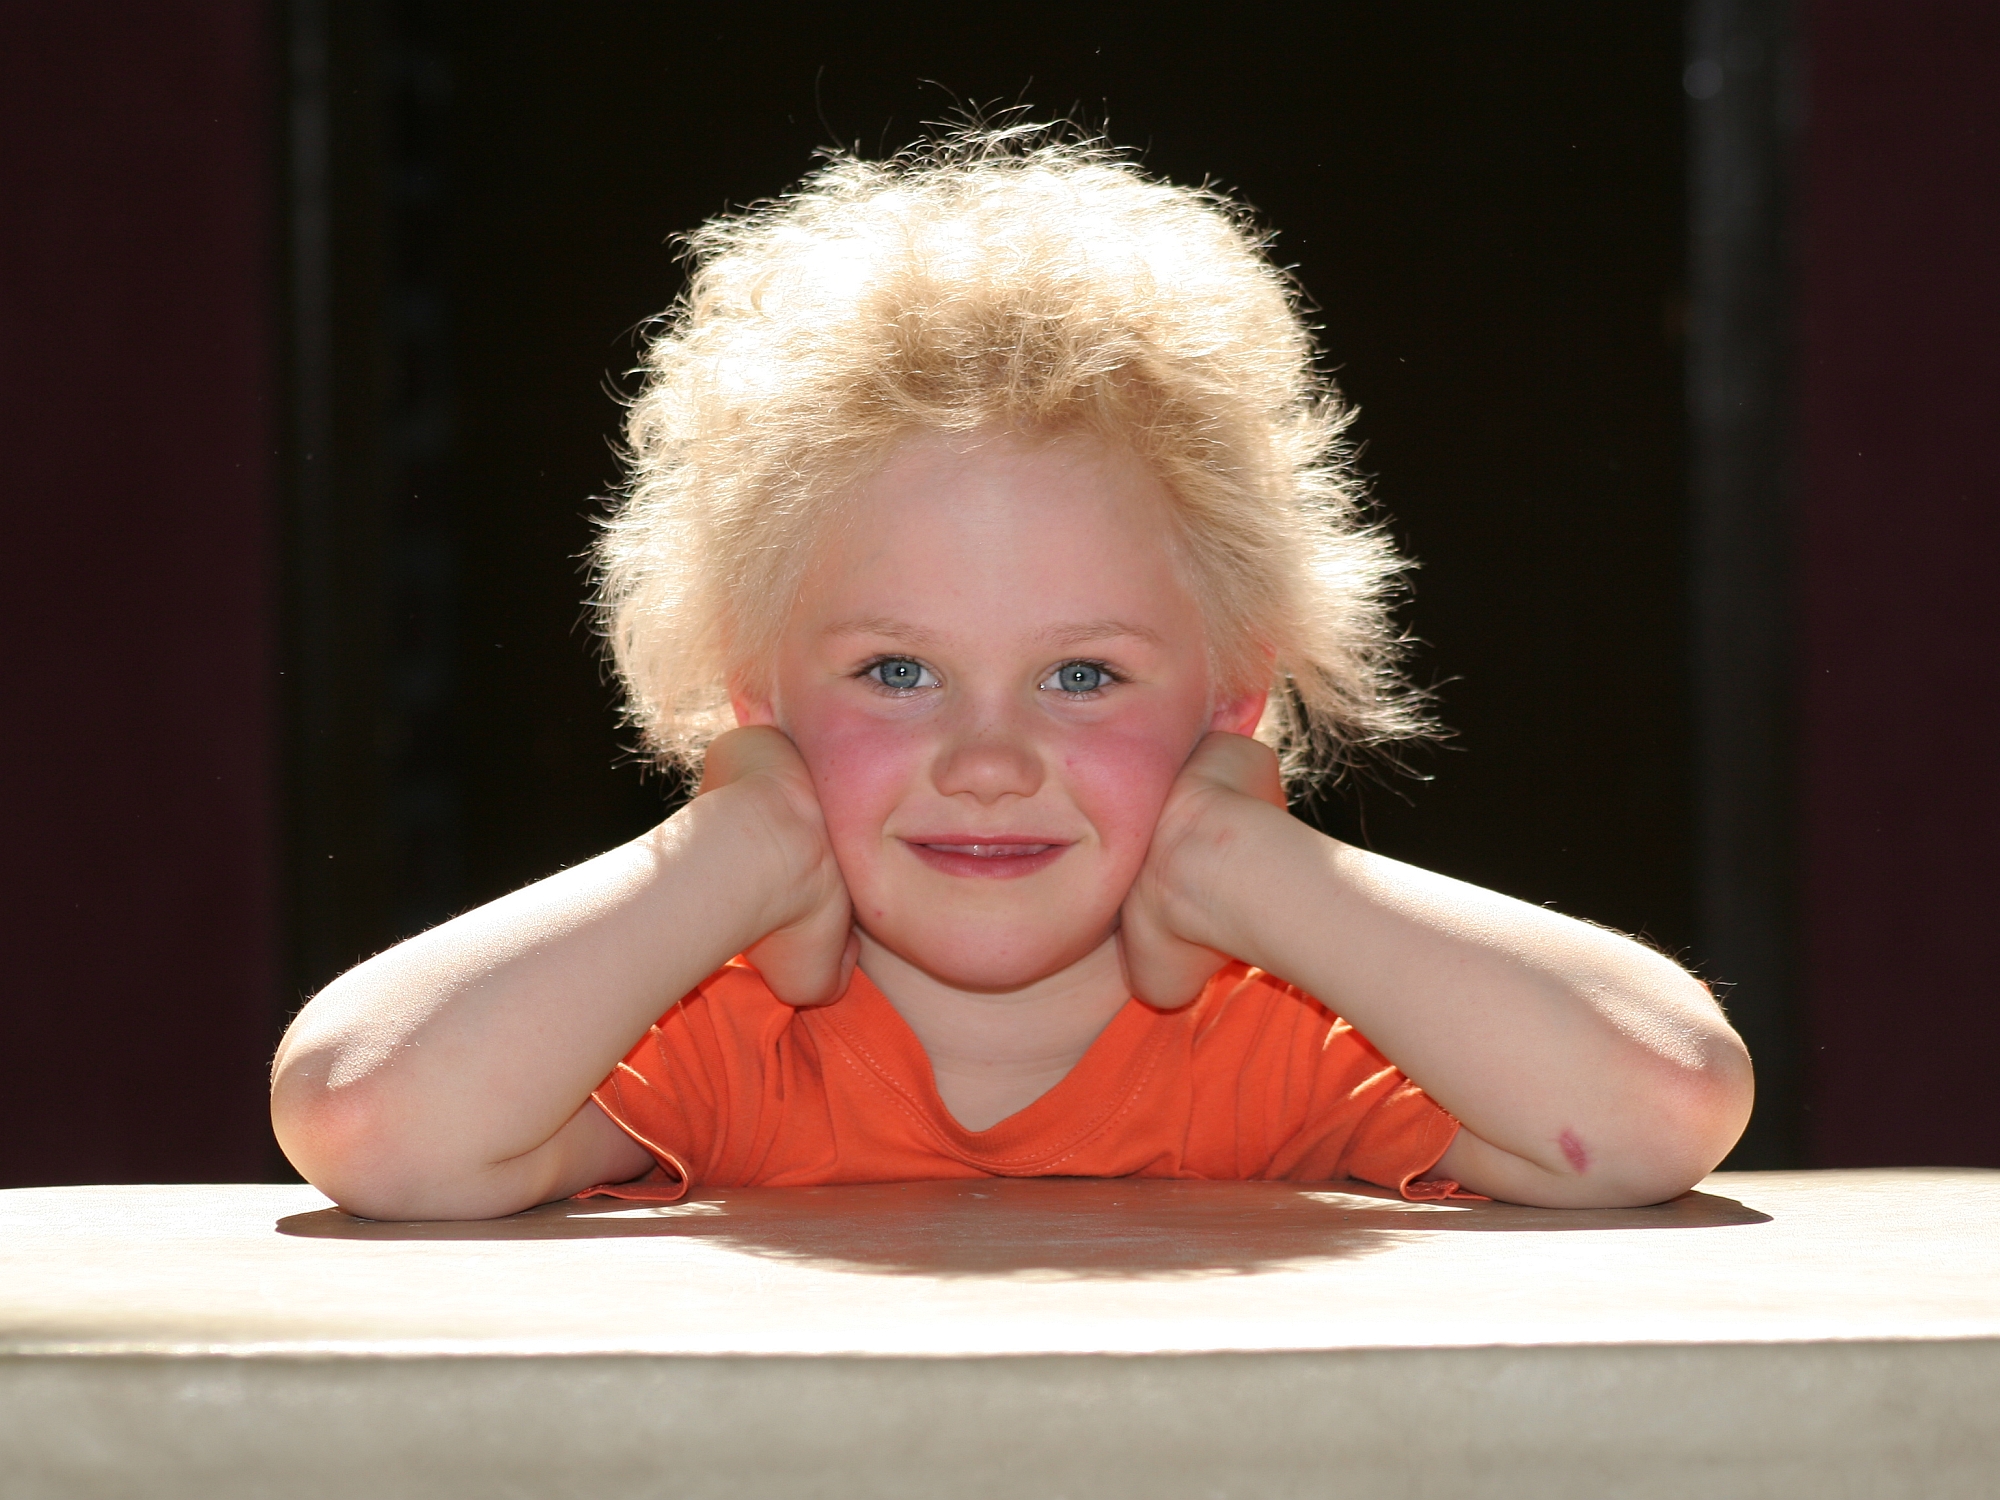 Uncombable Hair Syndrome is real, and now we know what causes it | Ars  Technica